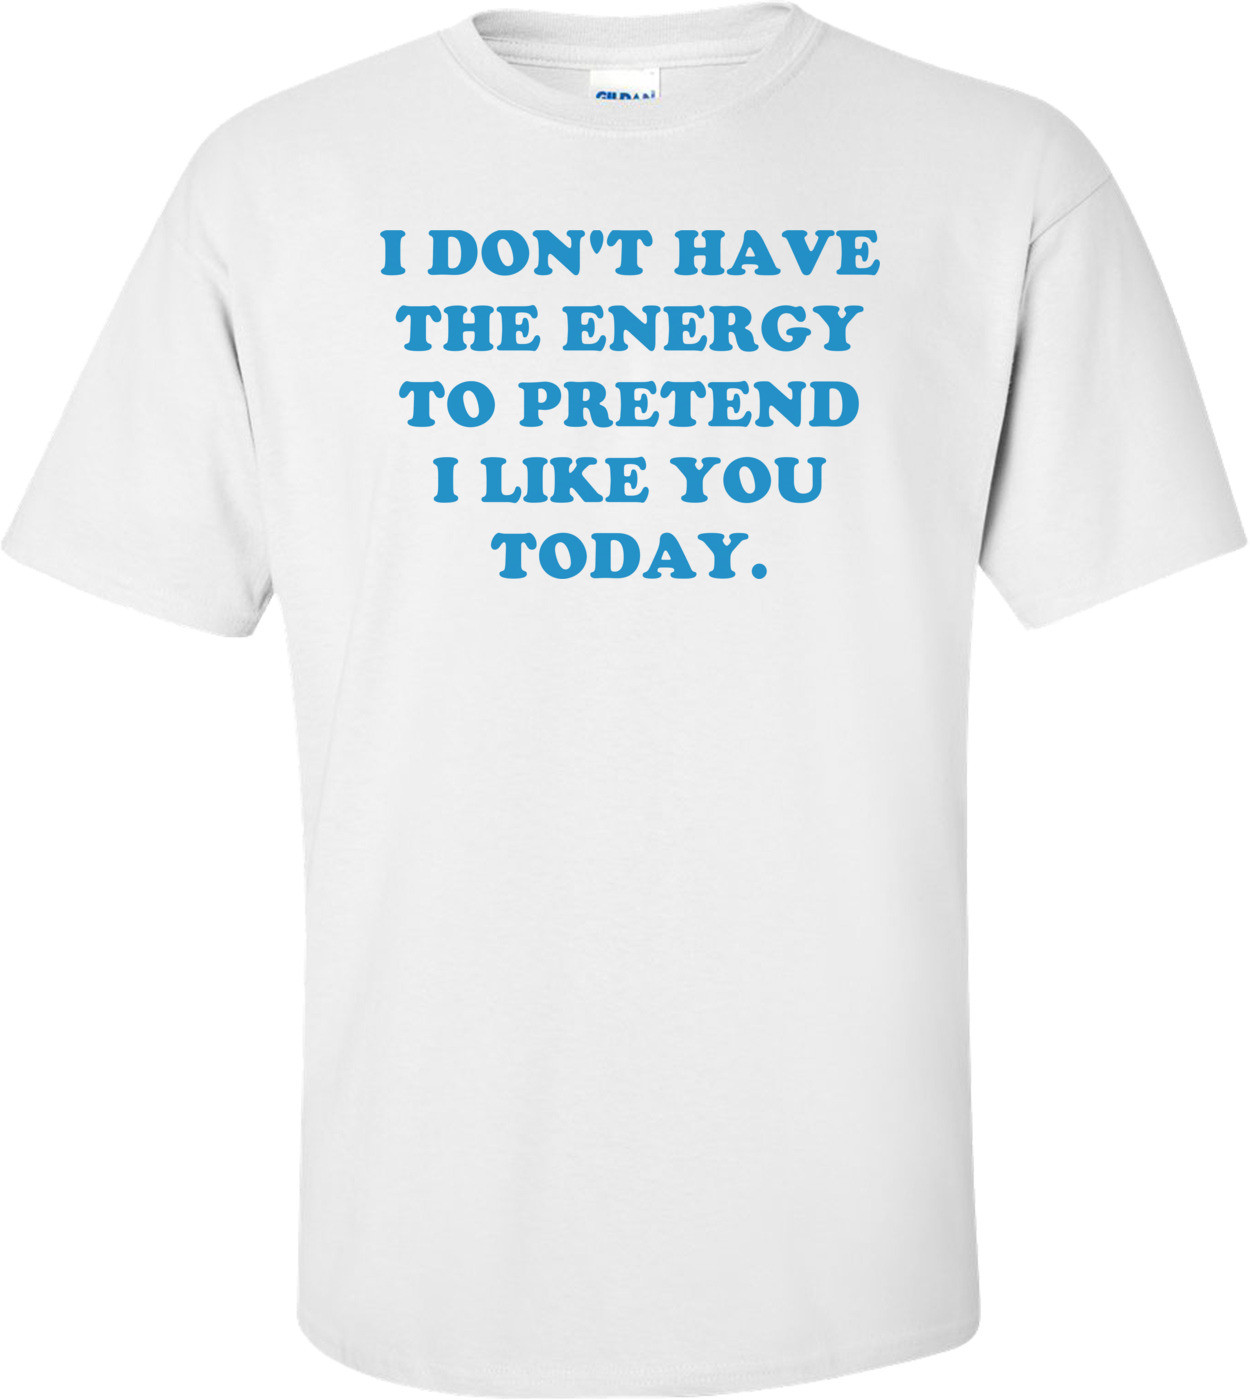 I DON'T HAVE THE ENERGY TO PRETEND I LIKE YOU TODAY. shirt